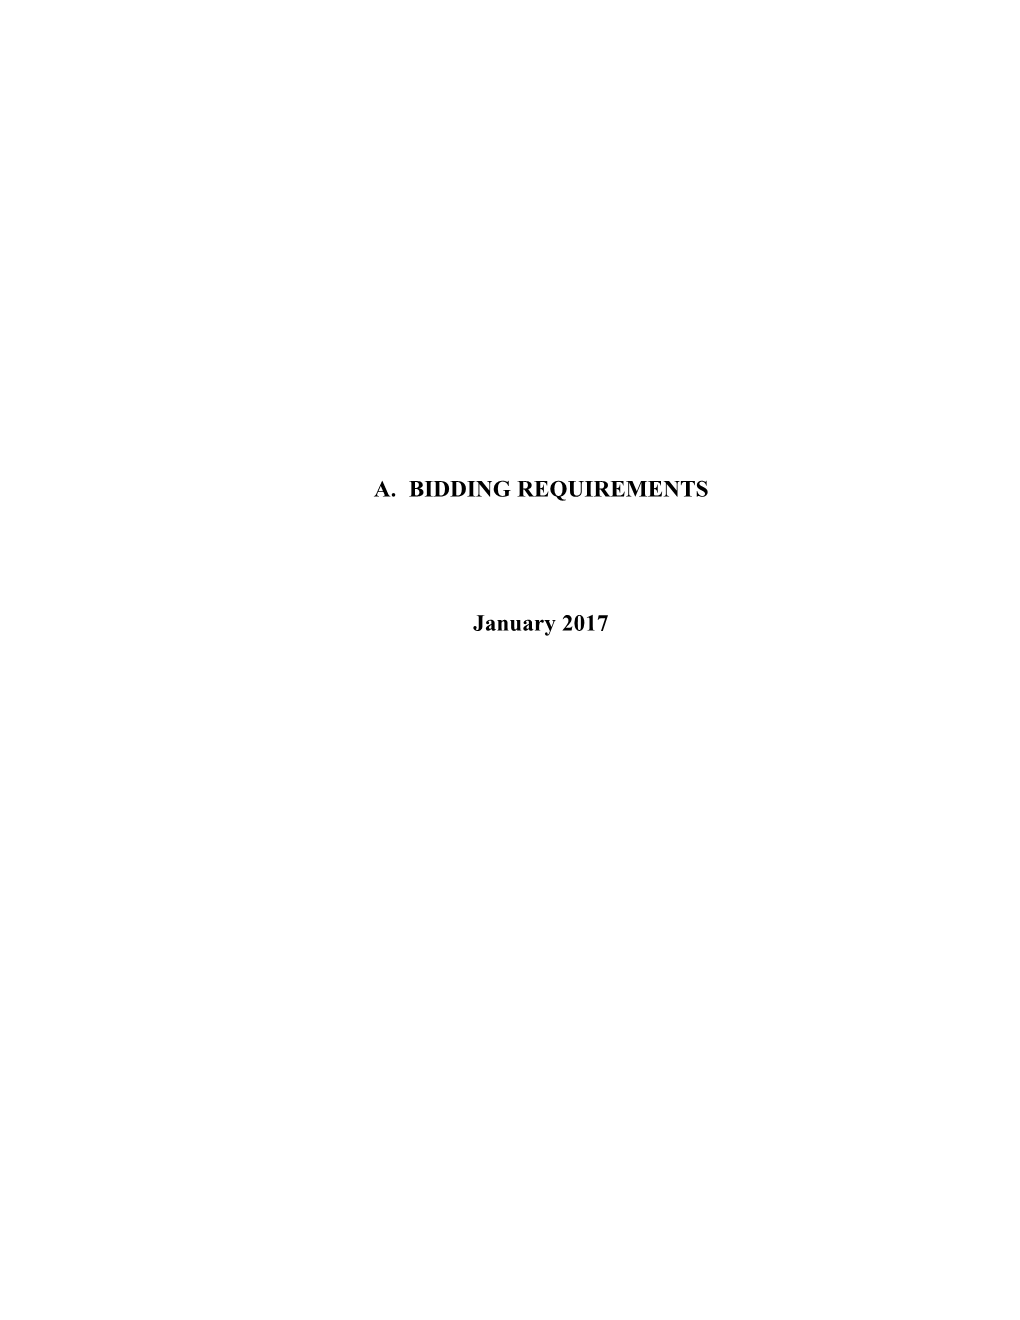 Joint Construction Contract Documents